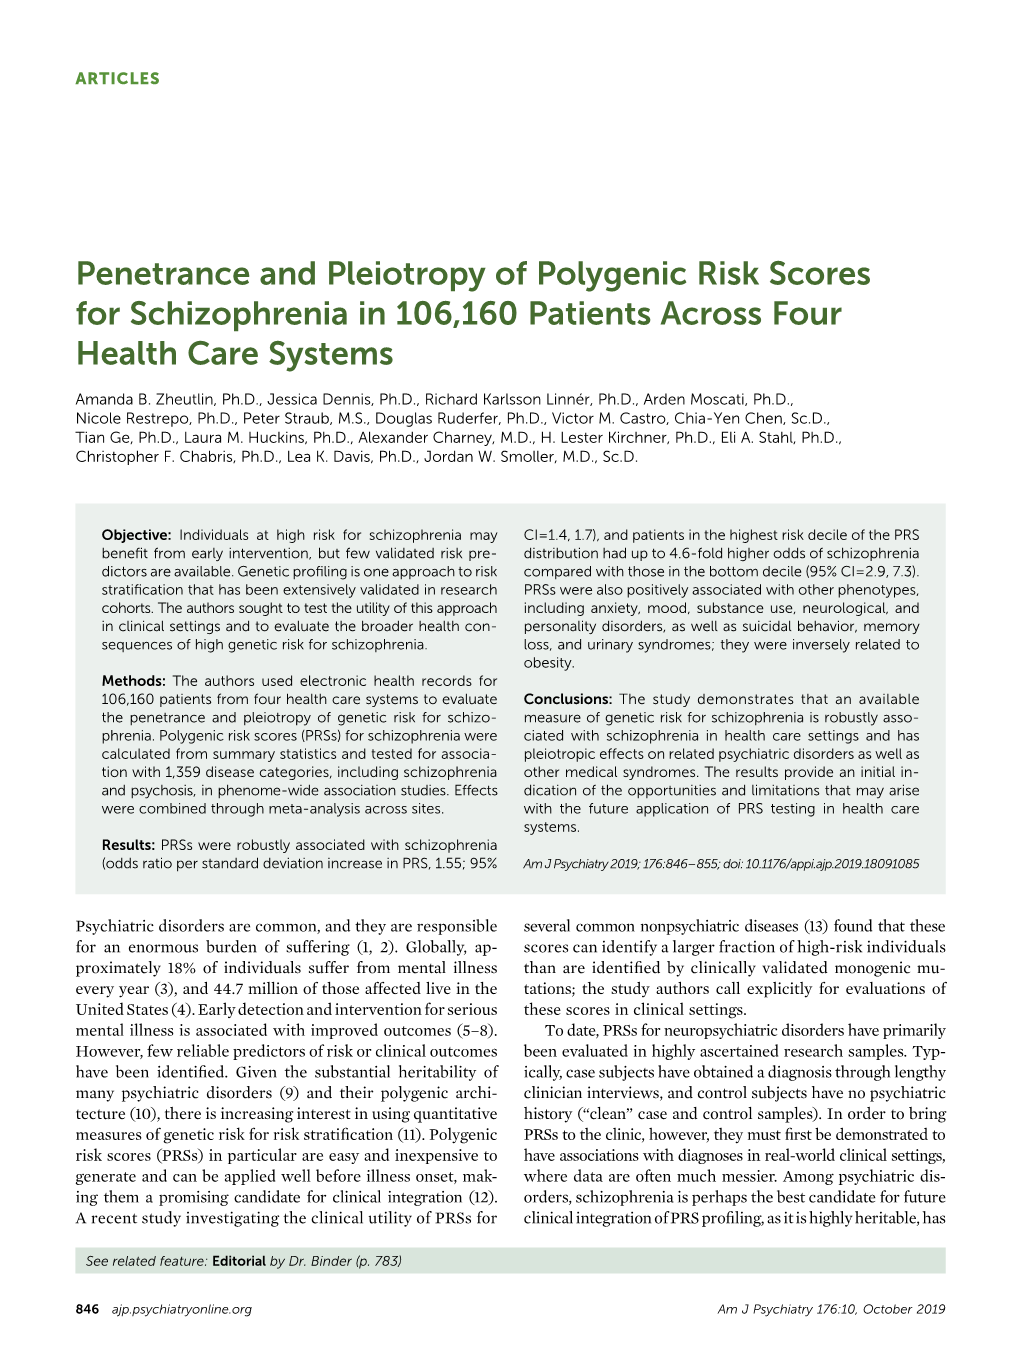 Penetrance and Pleiotropy of Polygenic Risk Scores for Schizophrenia in 106,160 Patients Across Four Health Care Systems